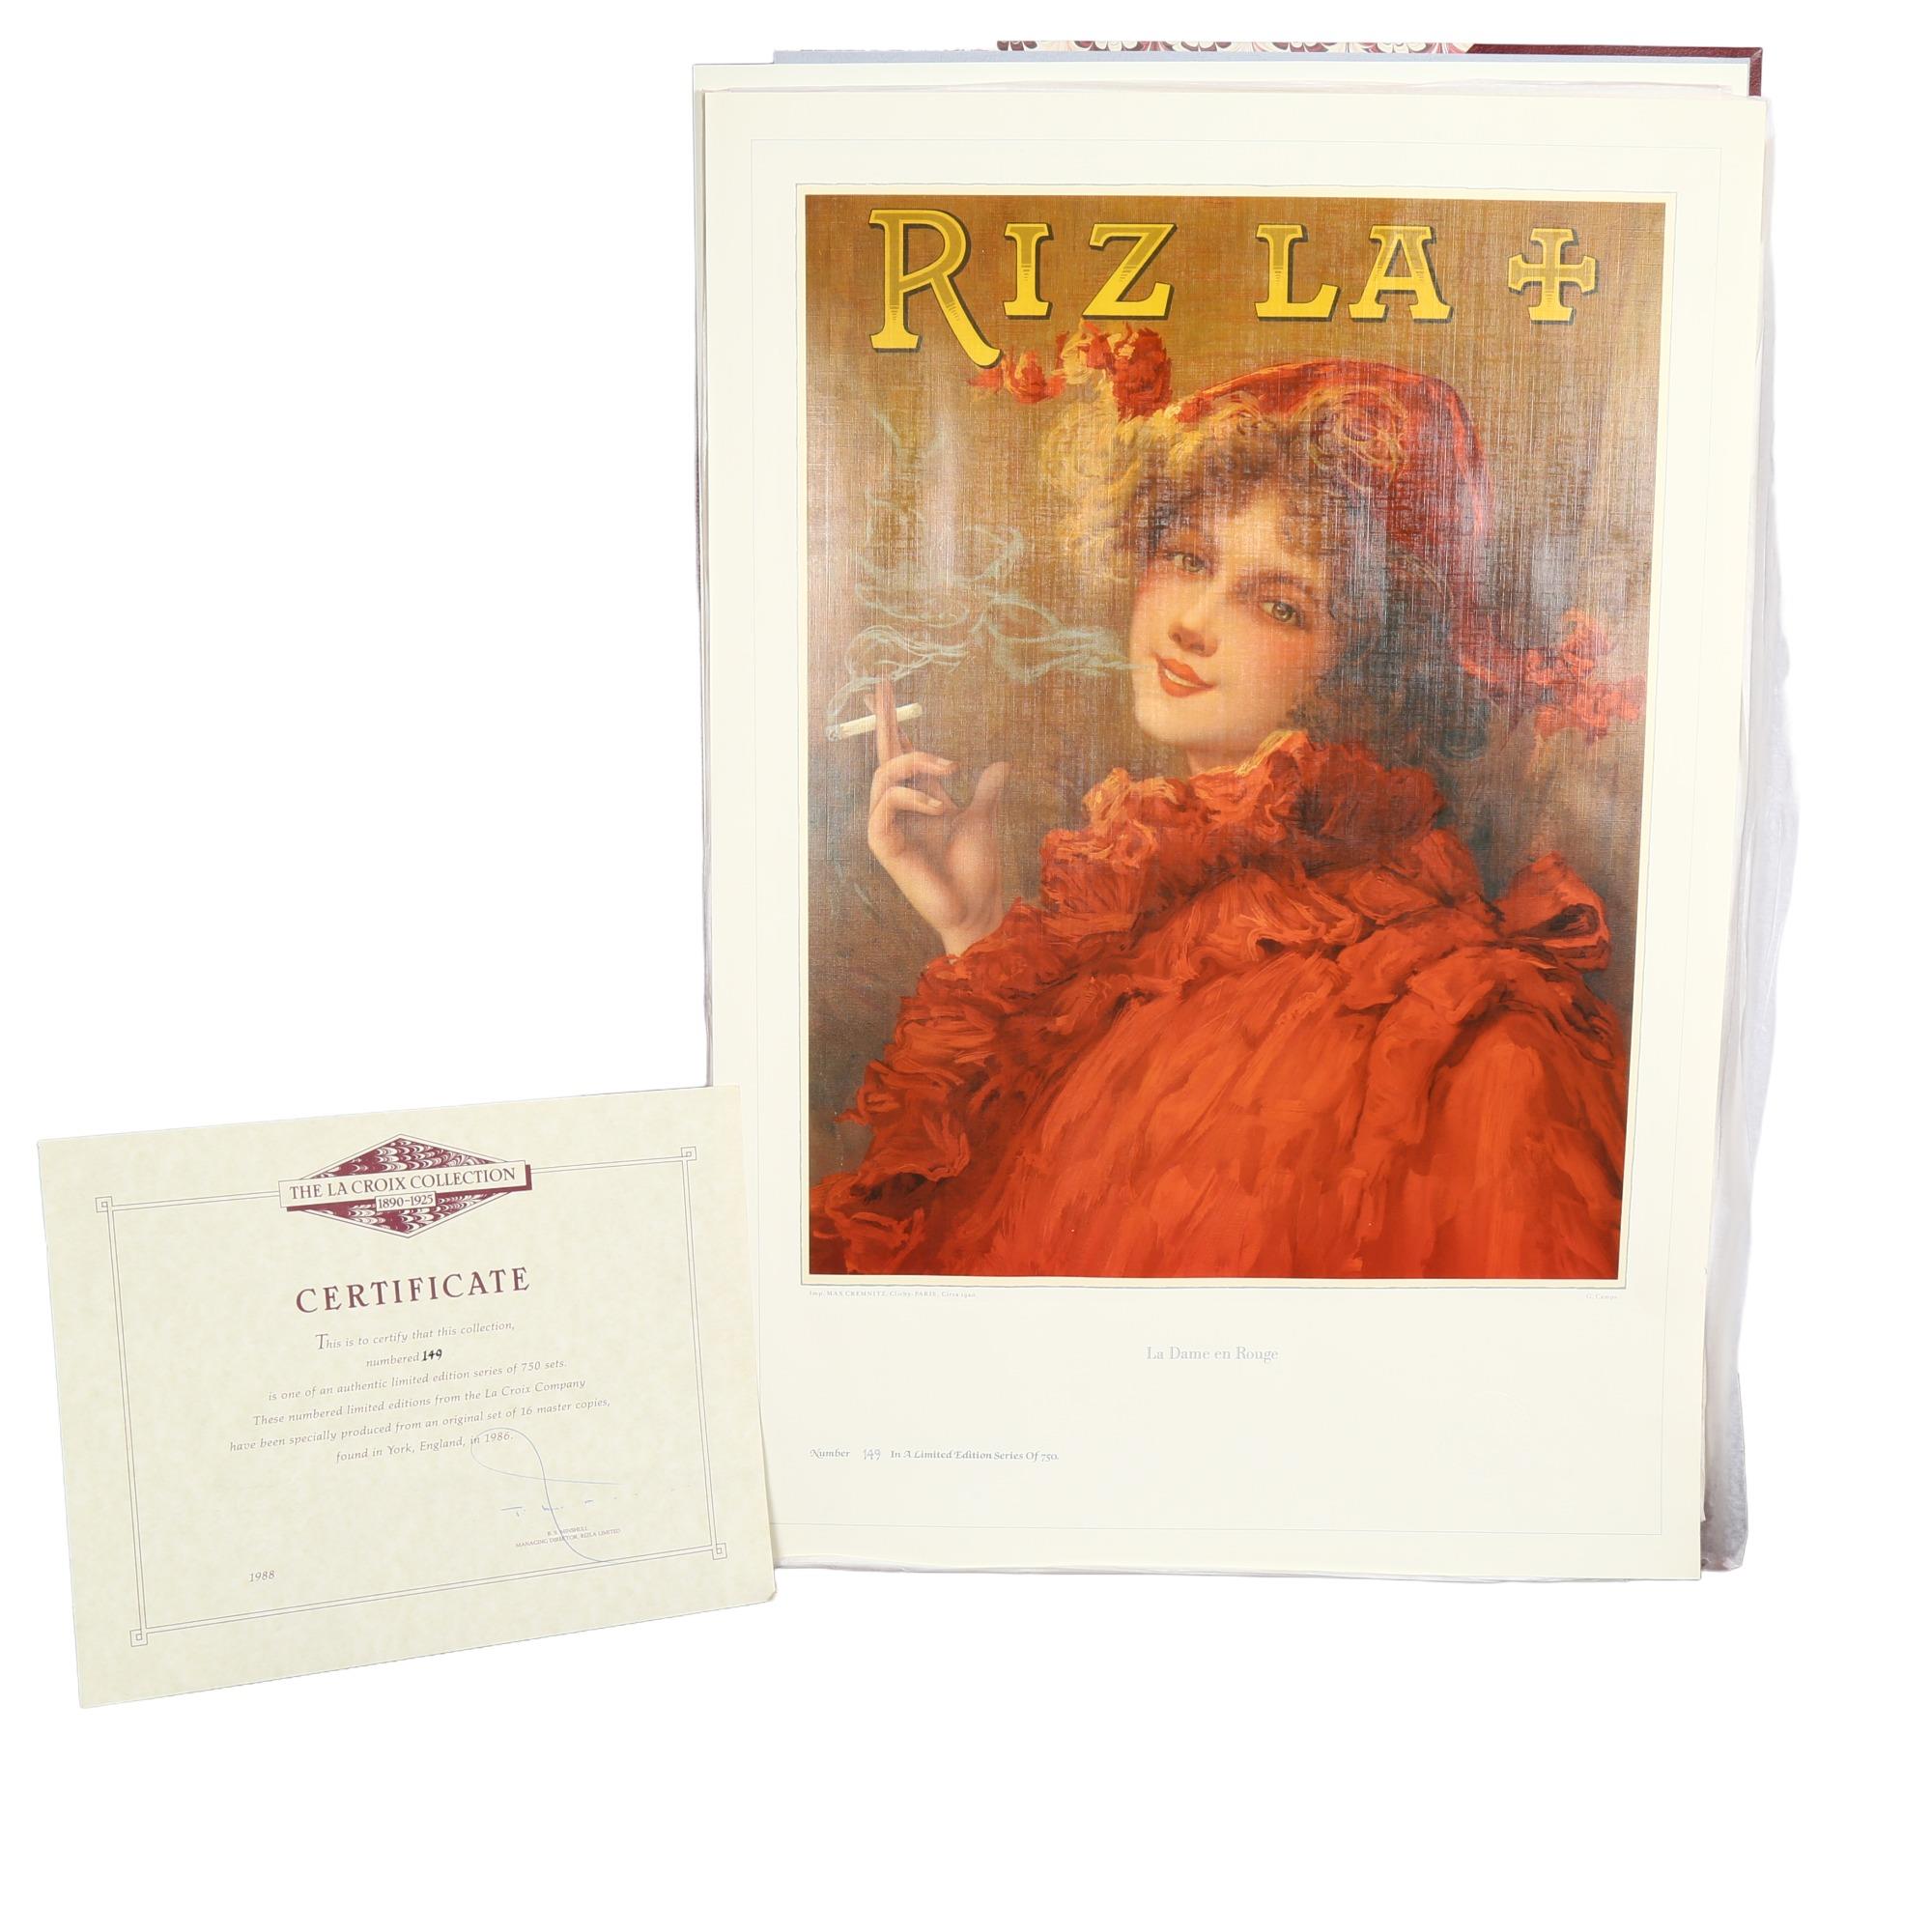 A 1986 La Croix collection of prints from 1890 - 1925, limited edition 149/750, with